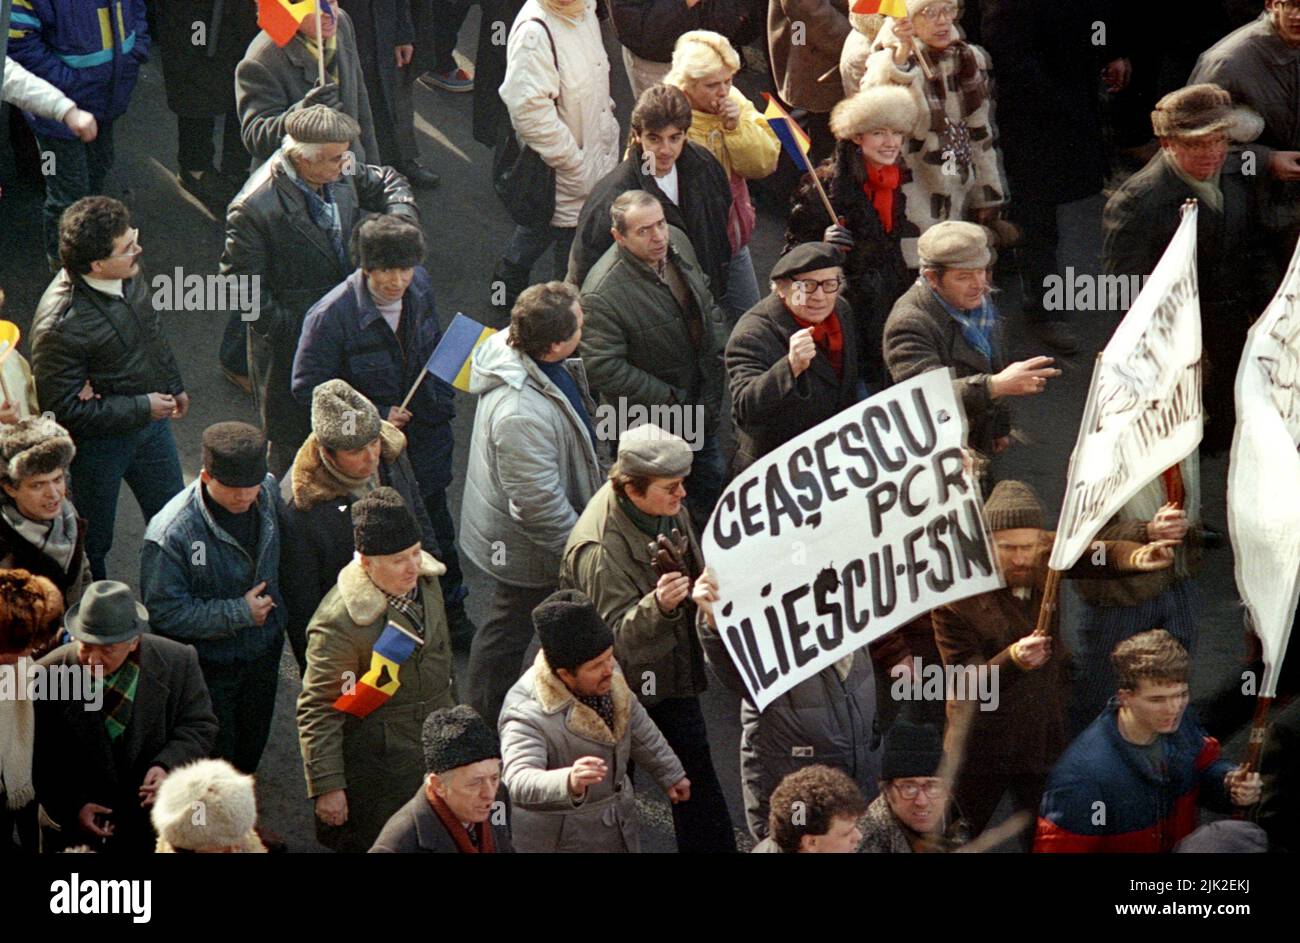 Bucharest, Romania, January 28, 1990. A month after the anti-communist revolution, supporters of the historical (right-wing) parties march against the new political system in place,  composed mainly of former communist officials. Stock Photo